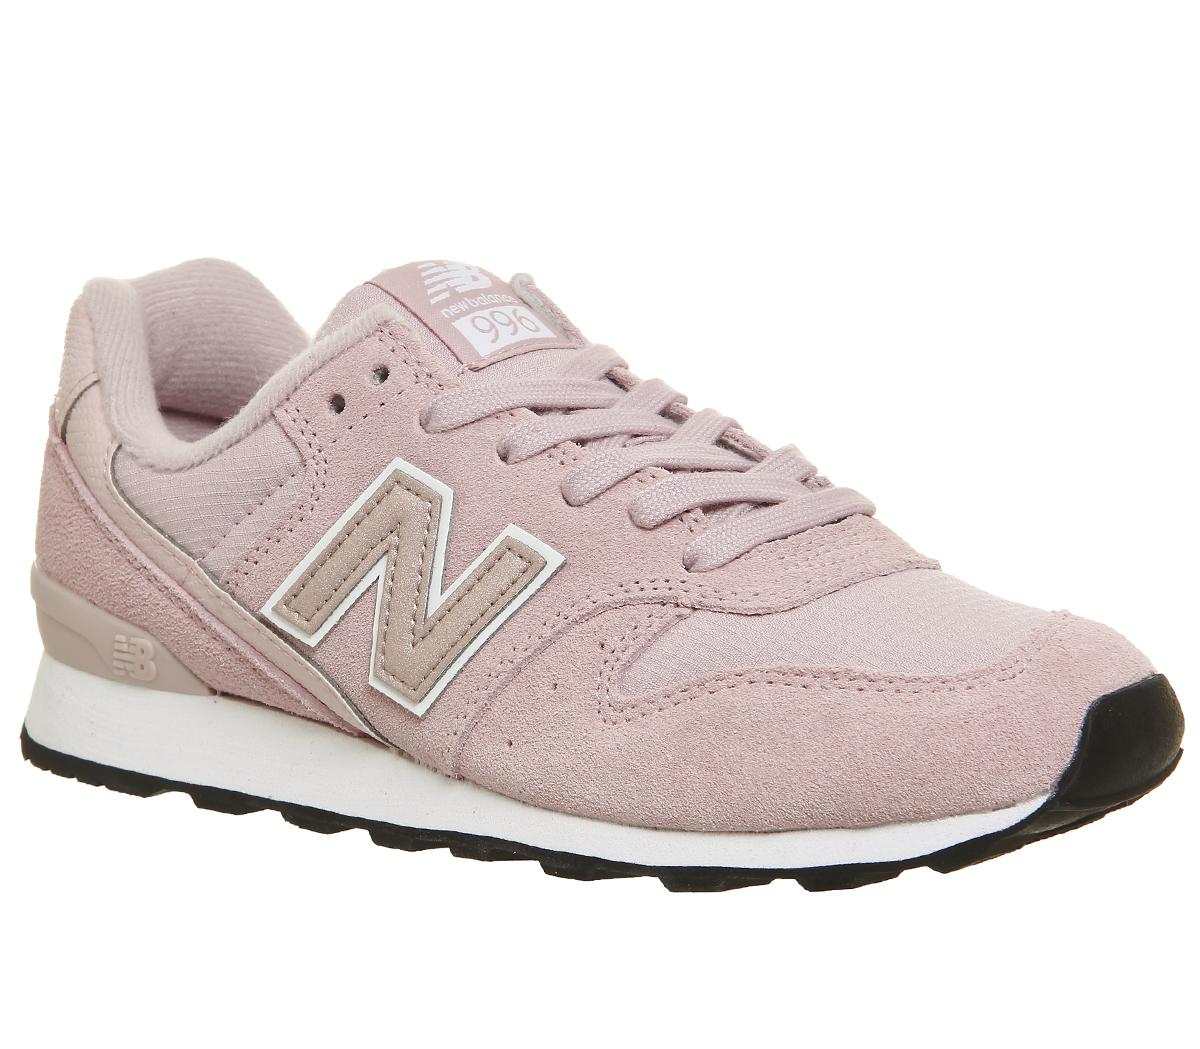 pink new balance trainers